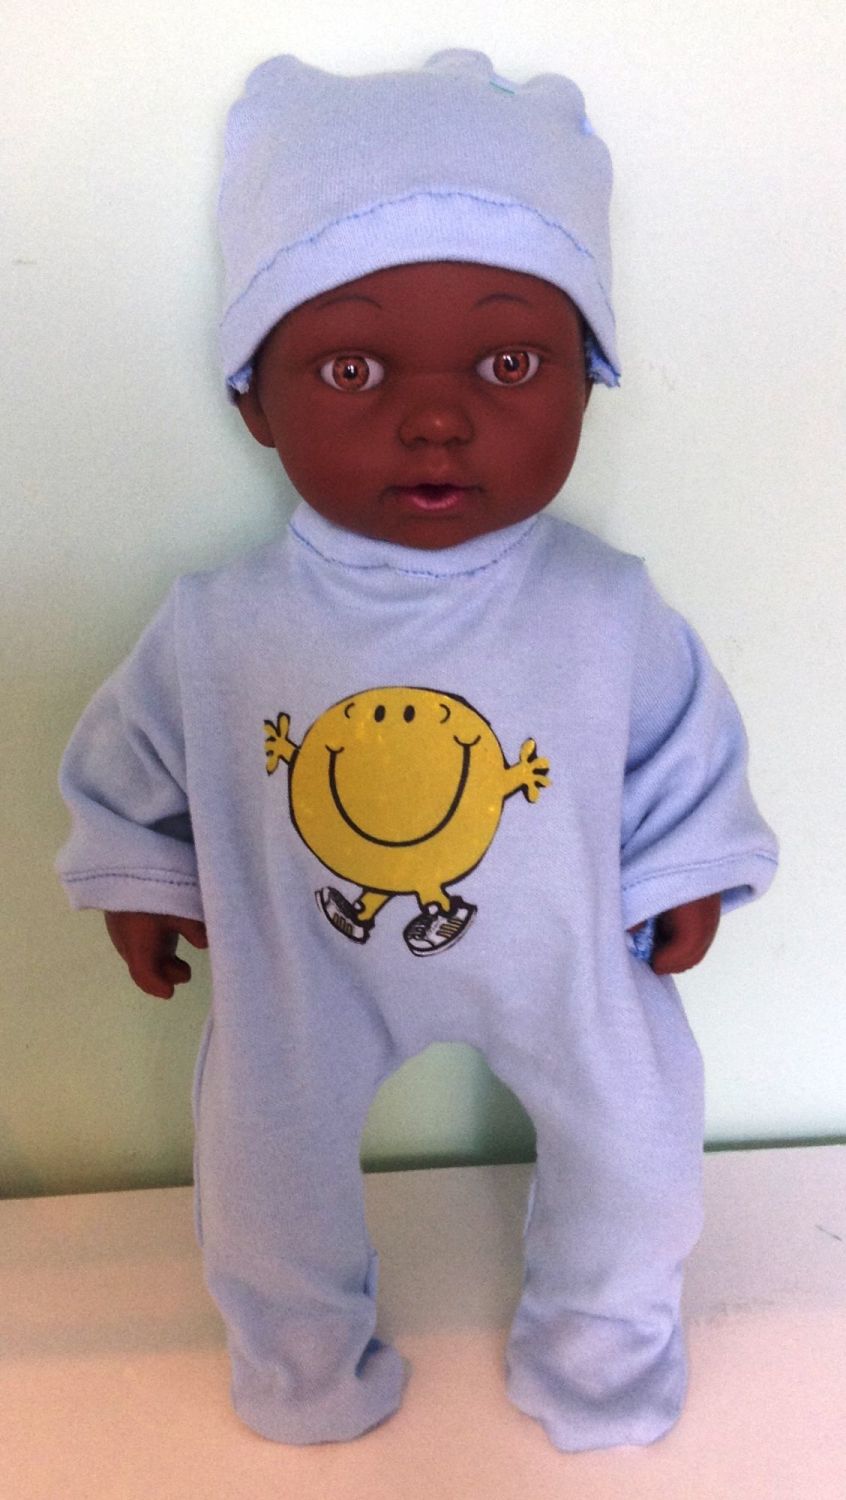 Doll's sleepsuit  / All In One made to fit a 12 inch high baby boy doll